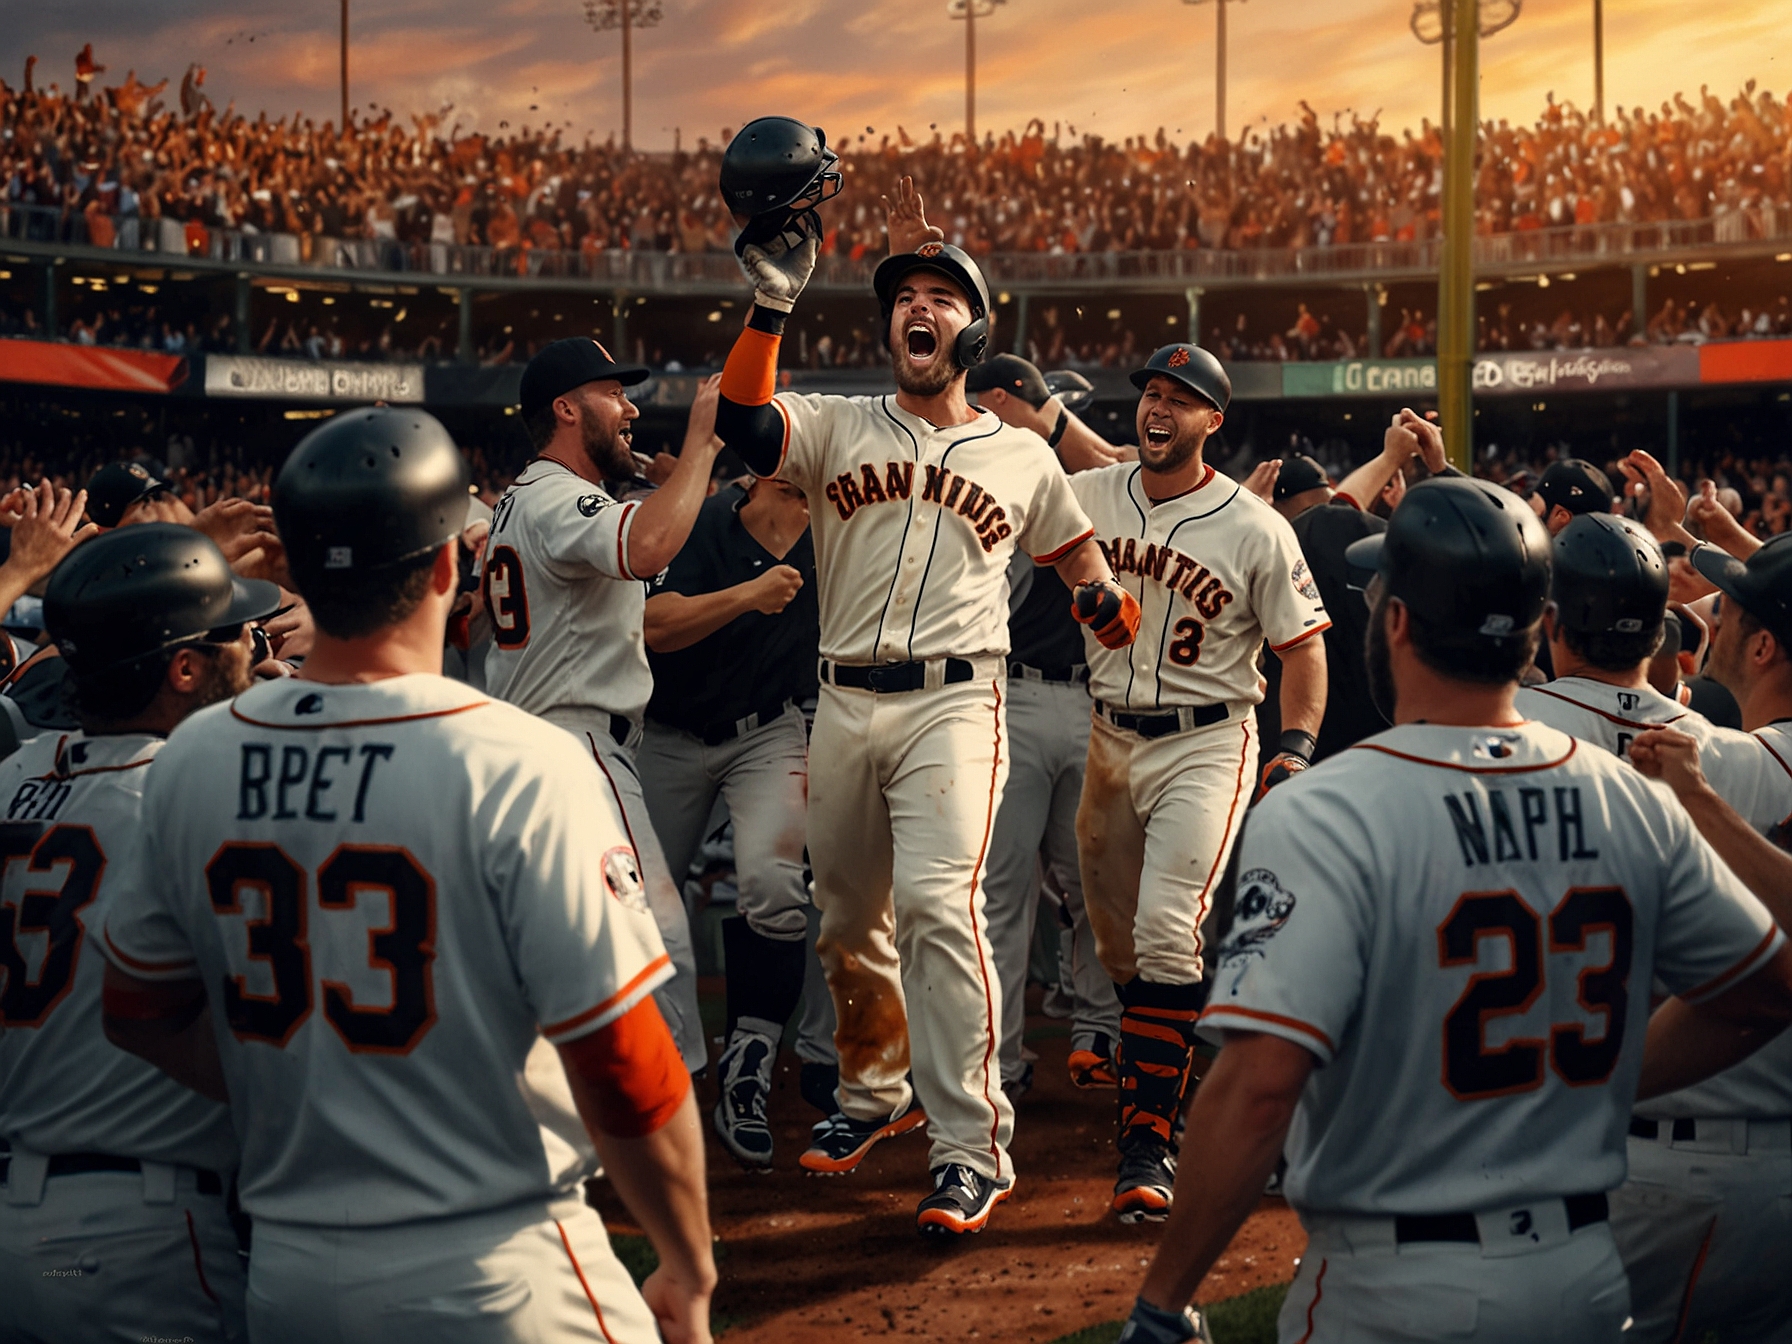 The San Francisco Giants celebrating with Brett Wisely at home plate after his game-winning two-run homer against the Los Angeles Dodgers, as the crowd erupts in joy at Oracle Park.